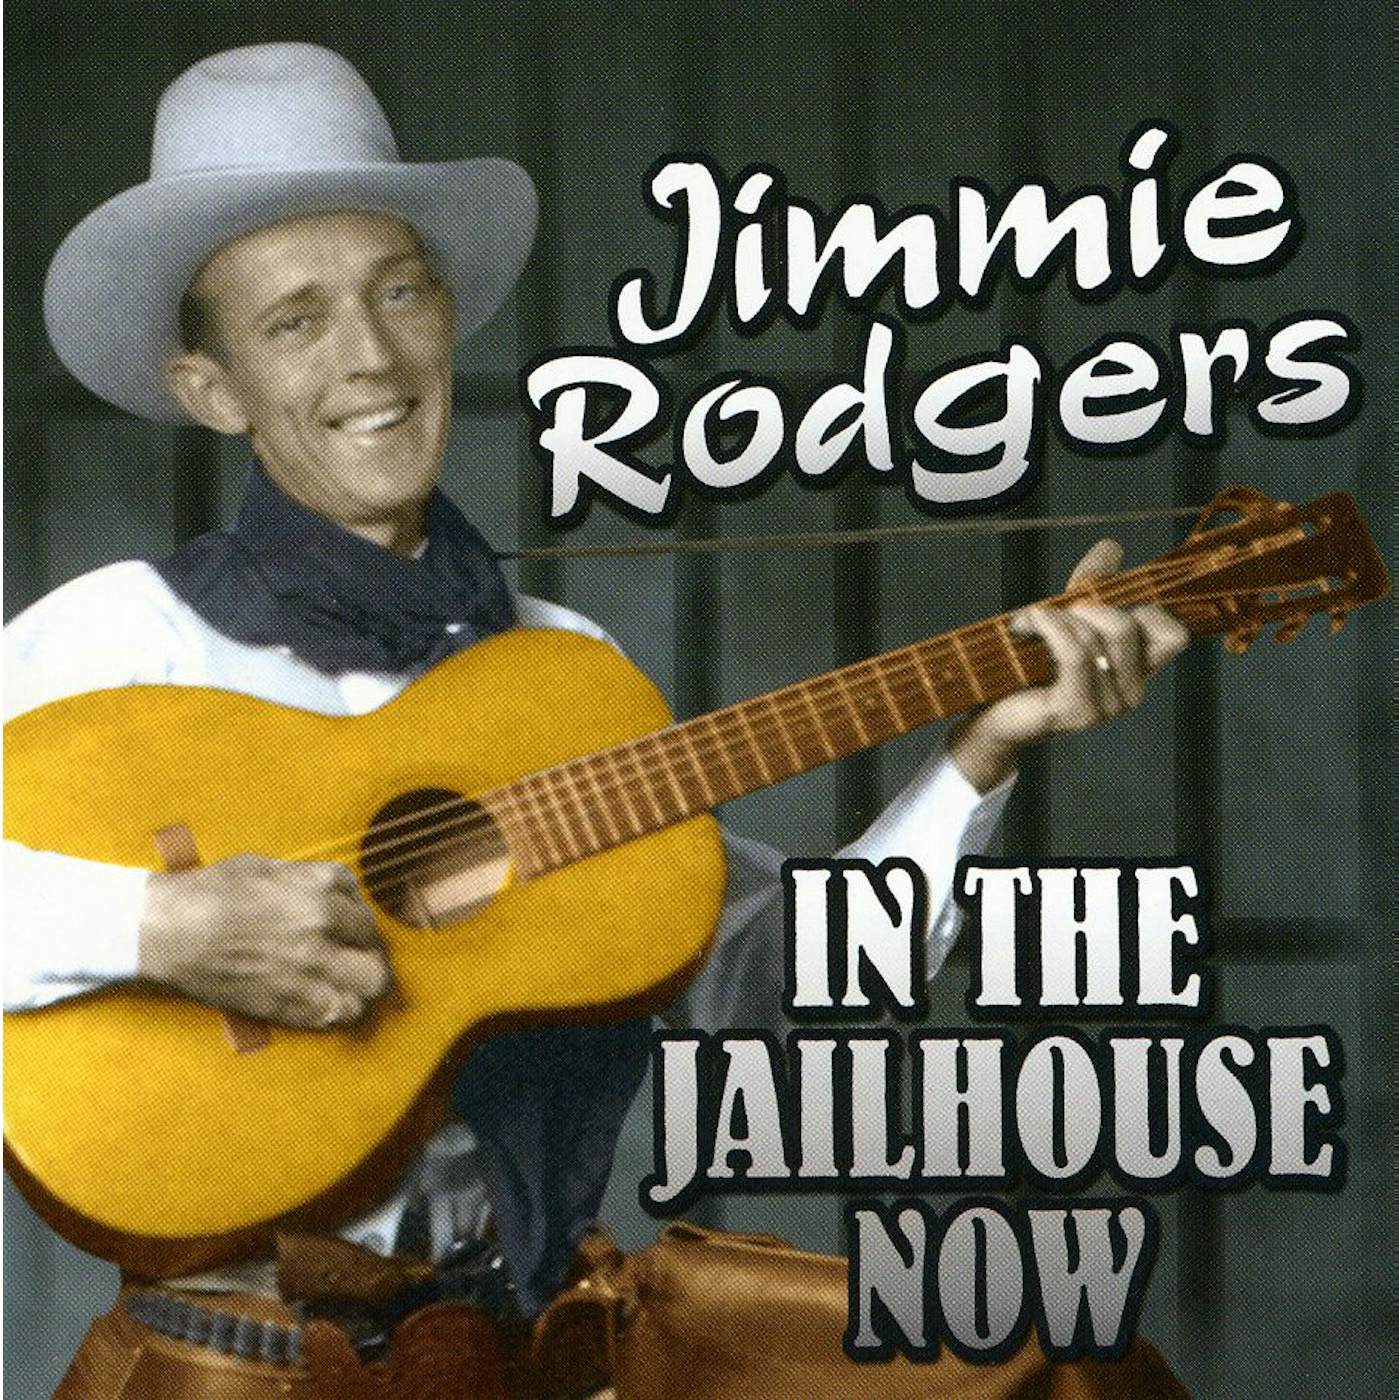 Jimmie Rodgers IN THE JAILHOUSE NOW CD